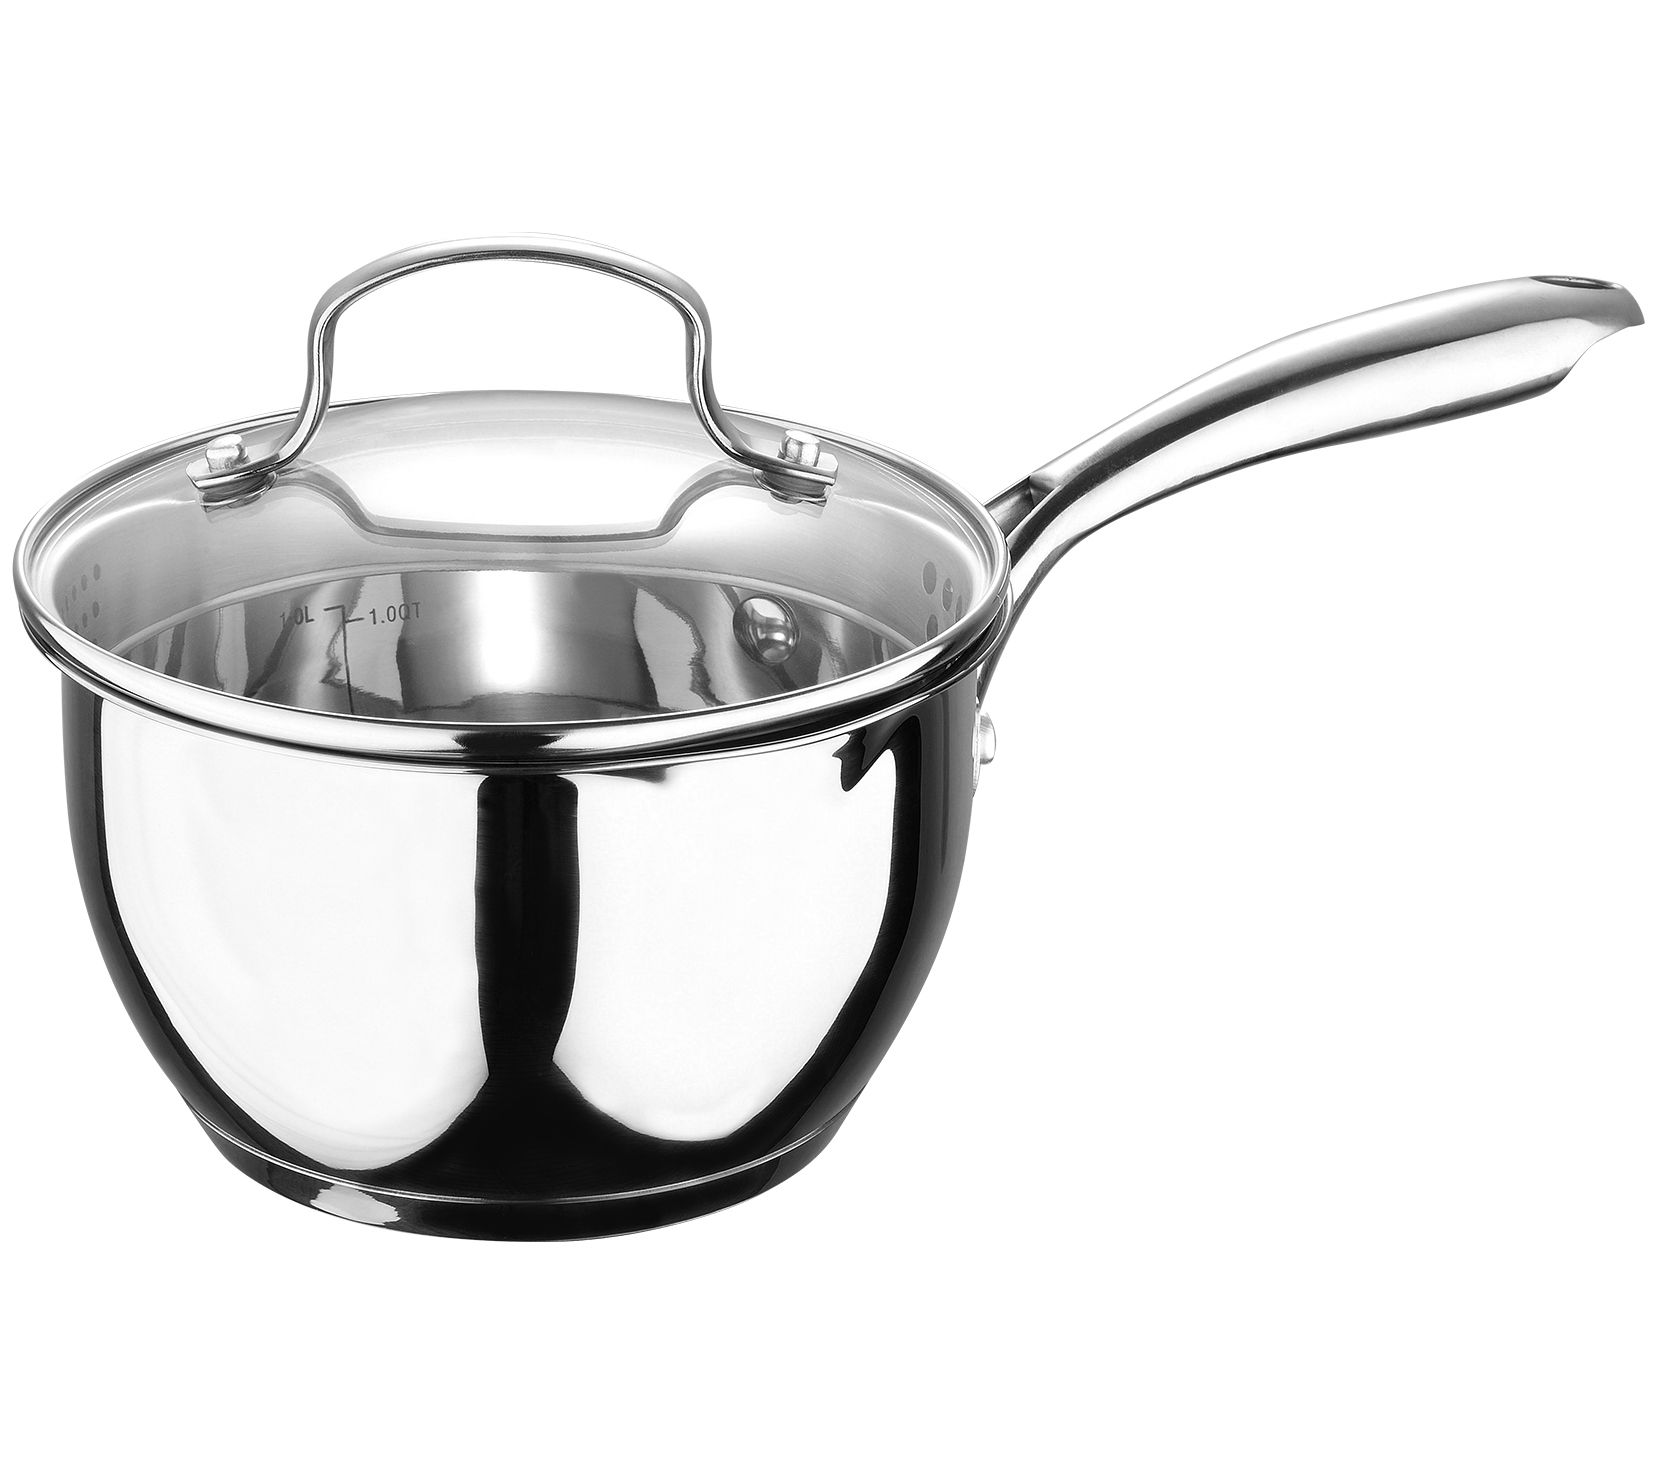 Bergner Essentials 1.5-Quart Stainless Steel Saucier Pot with Tempered Glass Lid - Silver - 1.5 Quart